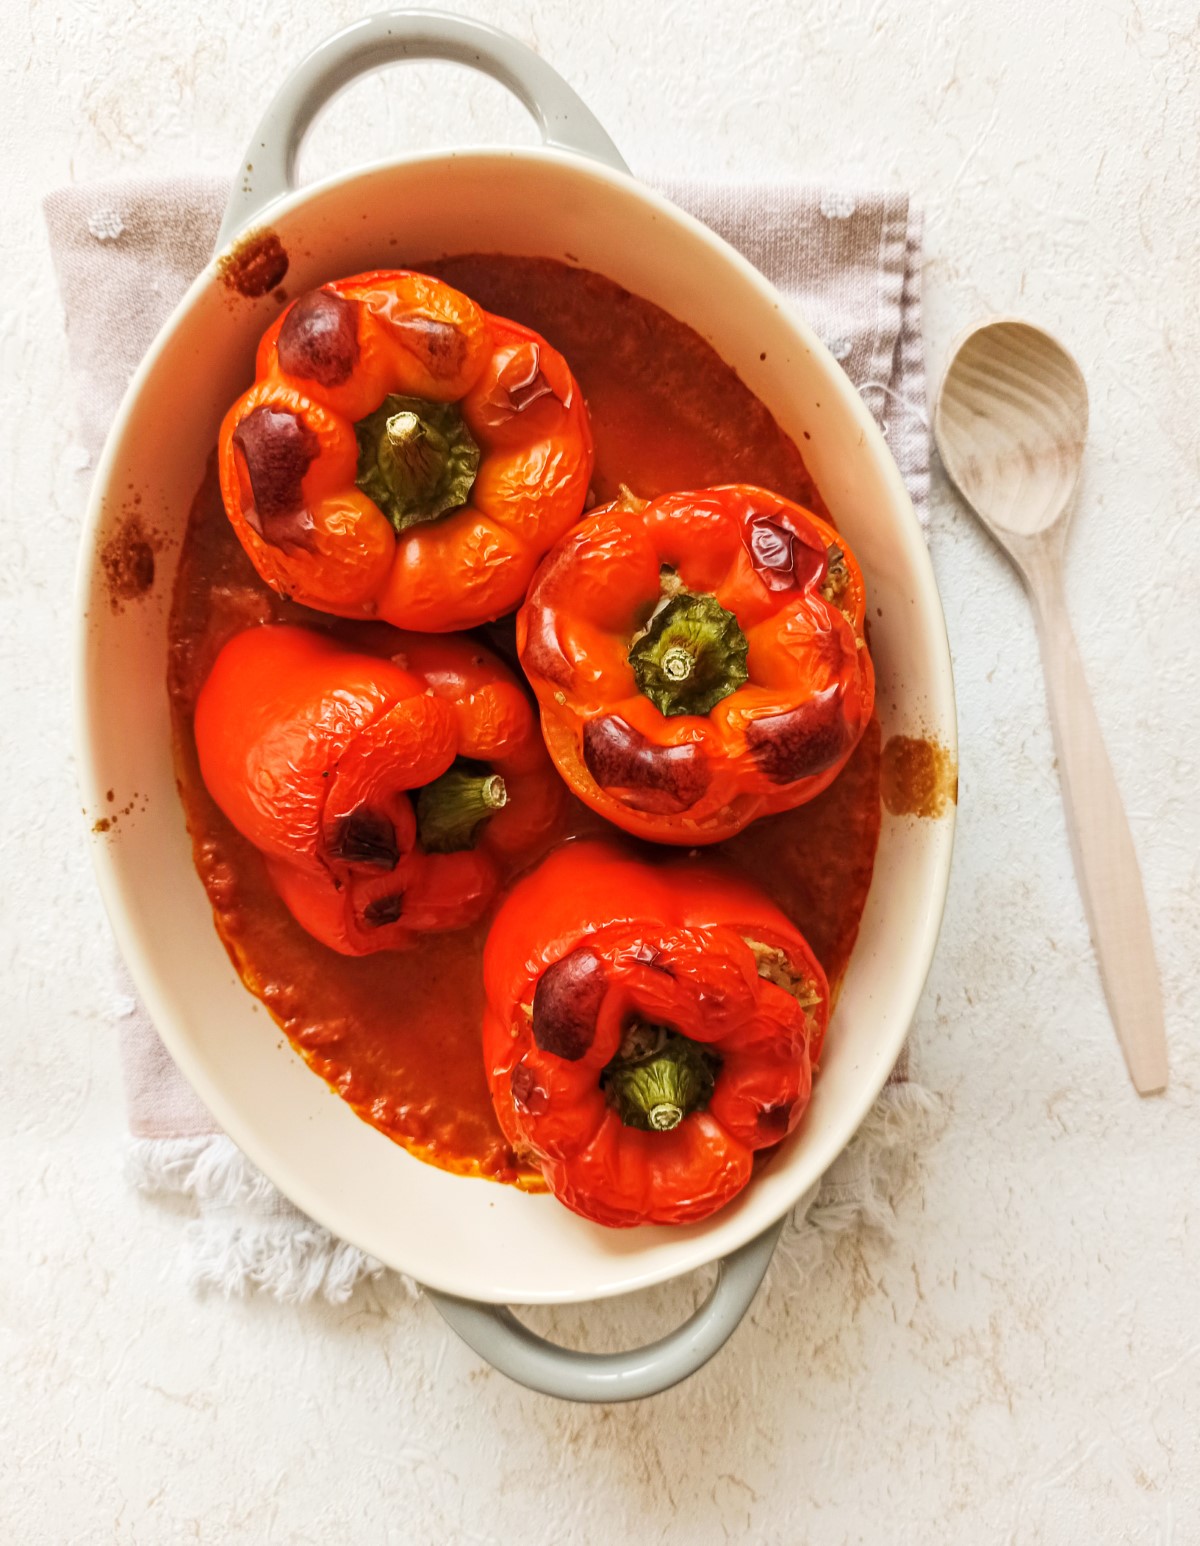 From a Pot - Stuffed Peppers with Vegetables